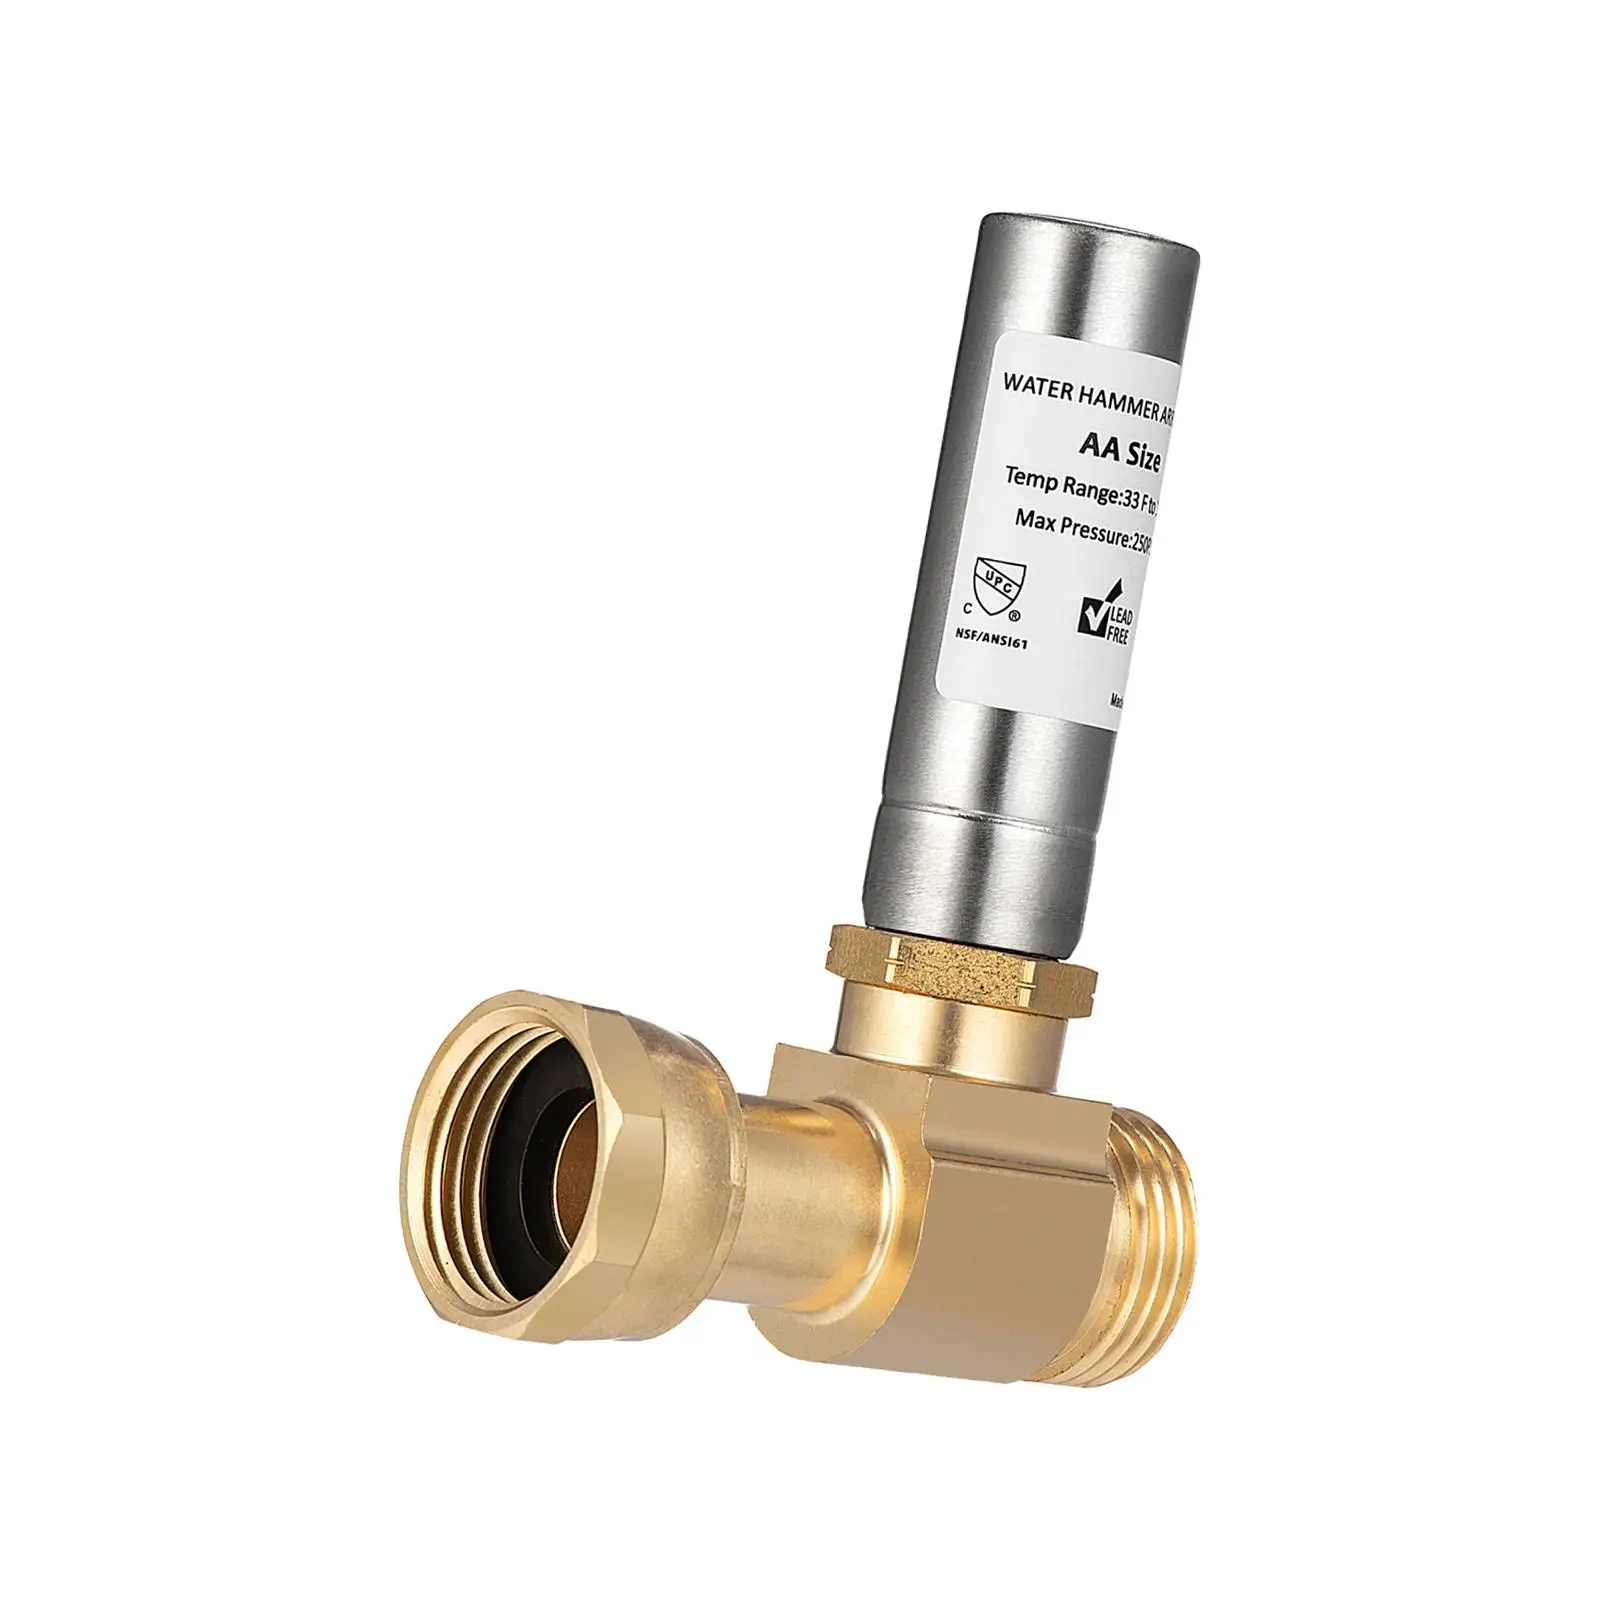 Water Hammer Arrestor High Temperature Brass Easy to Install Pressure Reducer for Washer Laundry Pipe Laundry Room Hotel Kitchen